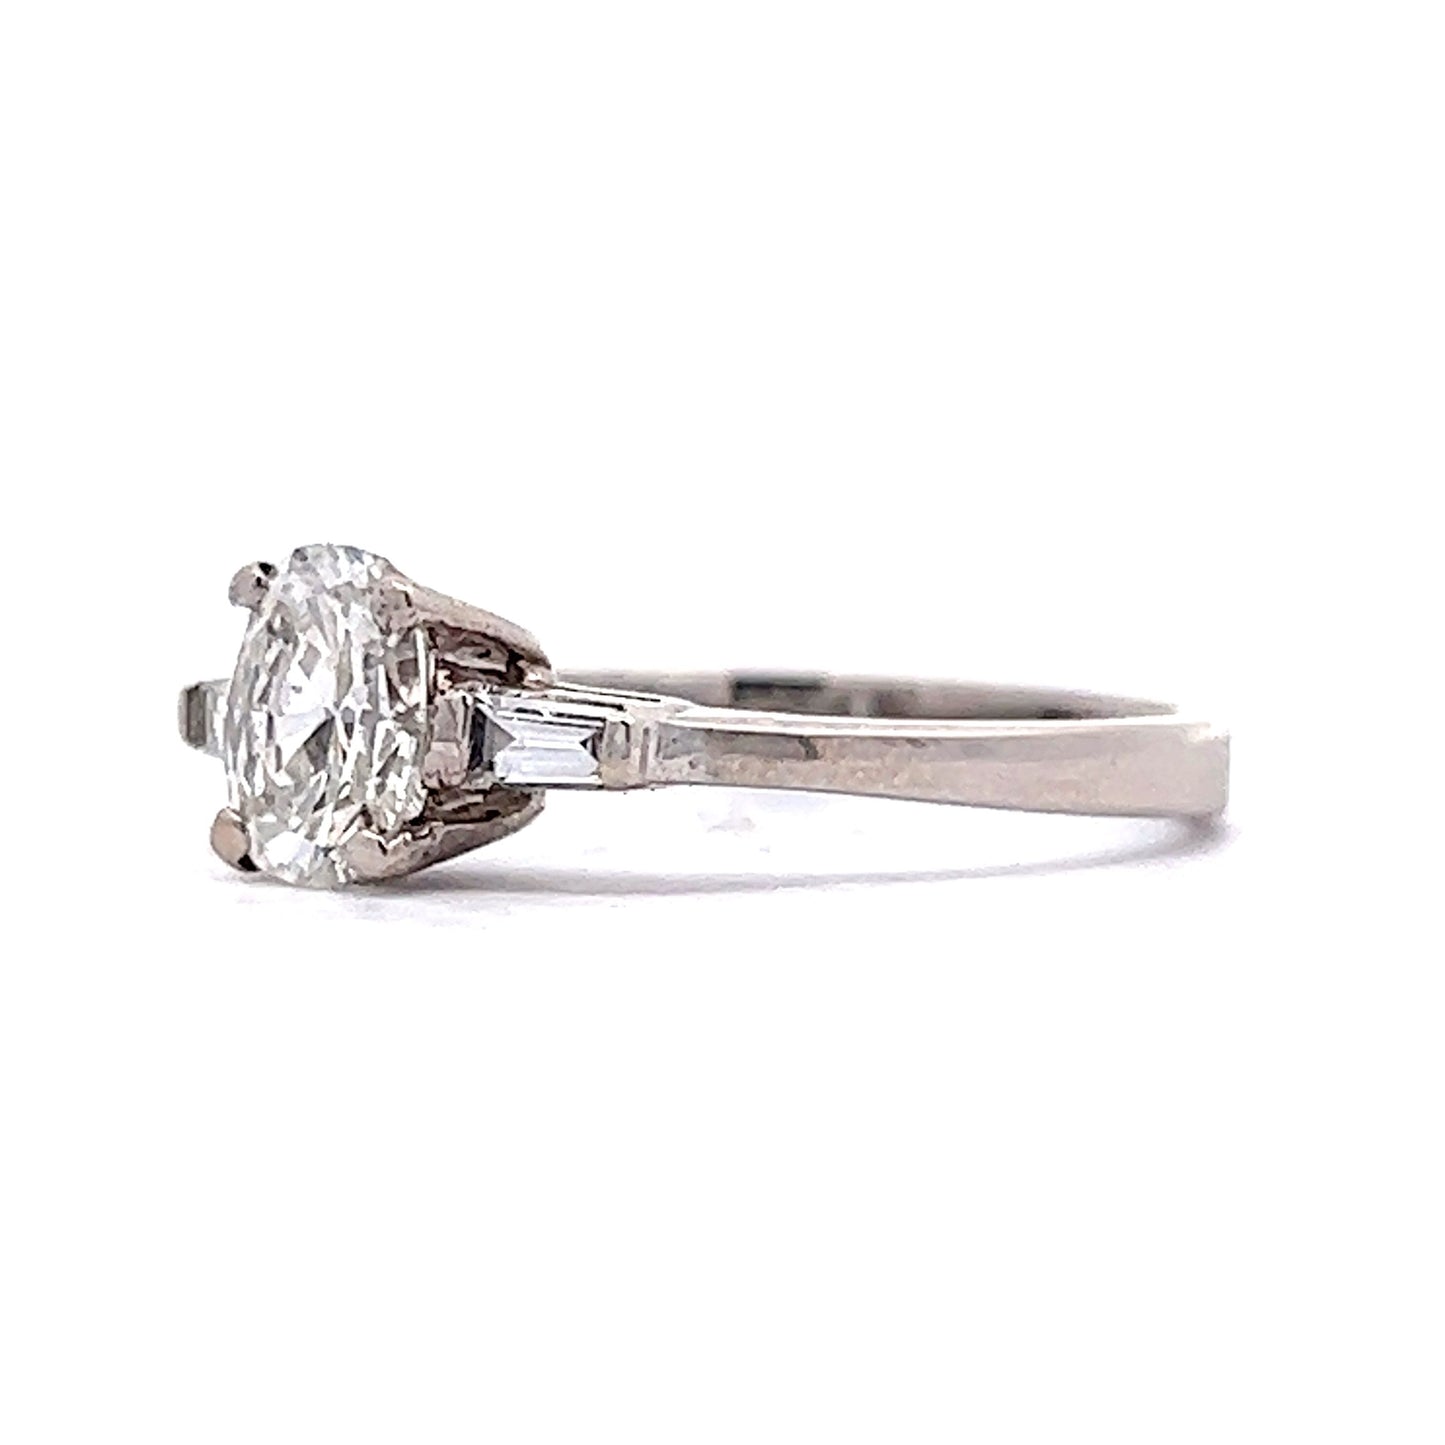 .82 Oval Cut Diamond Engagement Ring in 18k White Gold